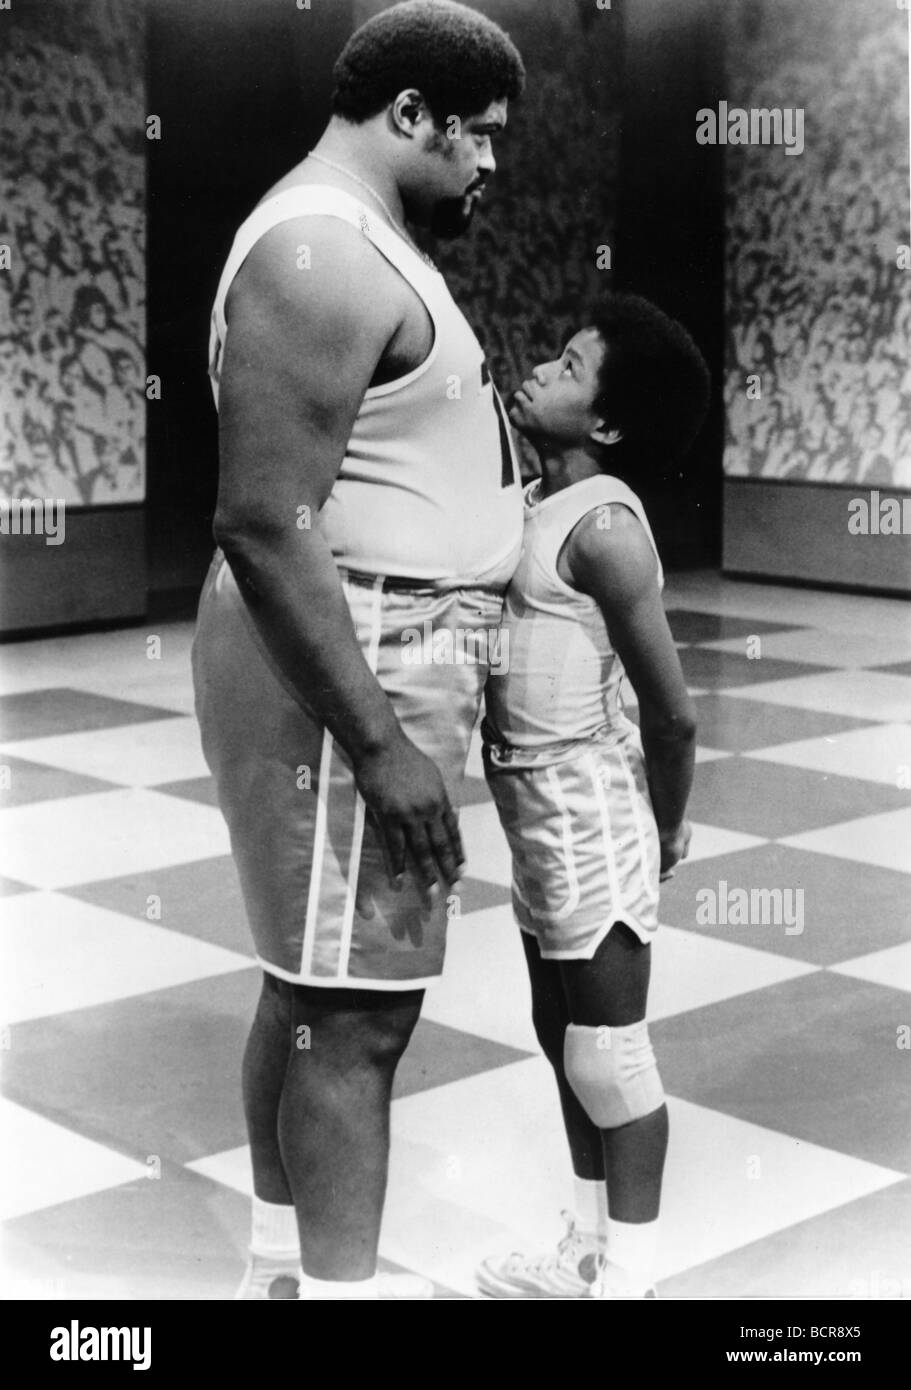 MICHAEL JACKSON  was often featured in comedy sketches on the Jackson Five TV show - here he shapes up to a basketball opponent Stock Photo